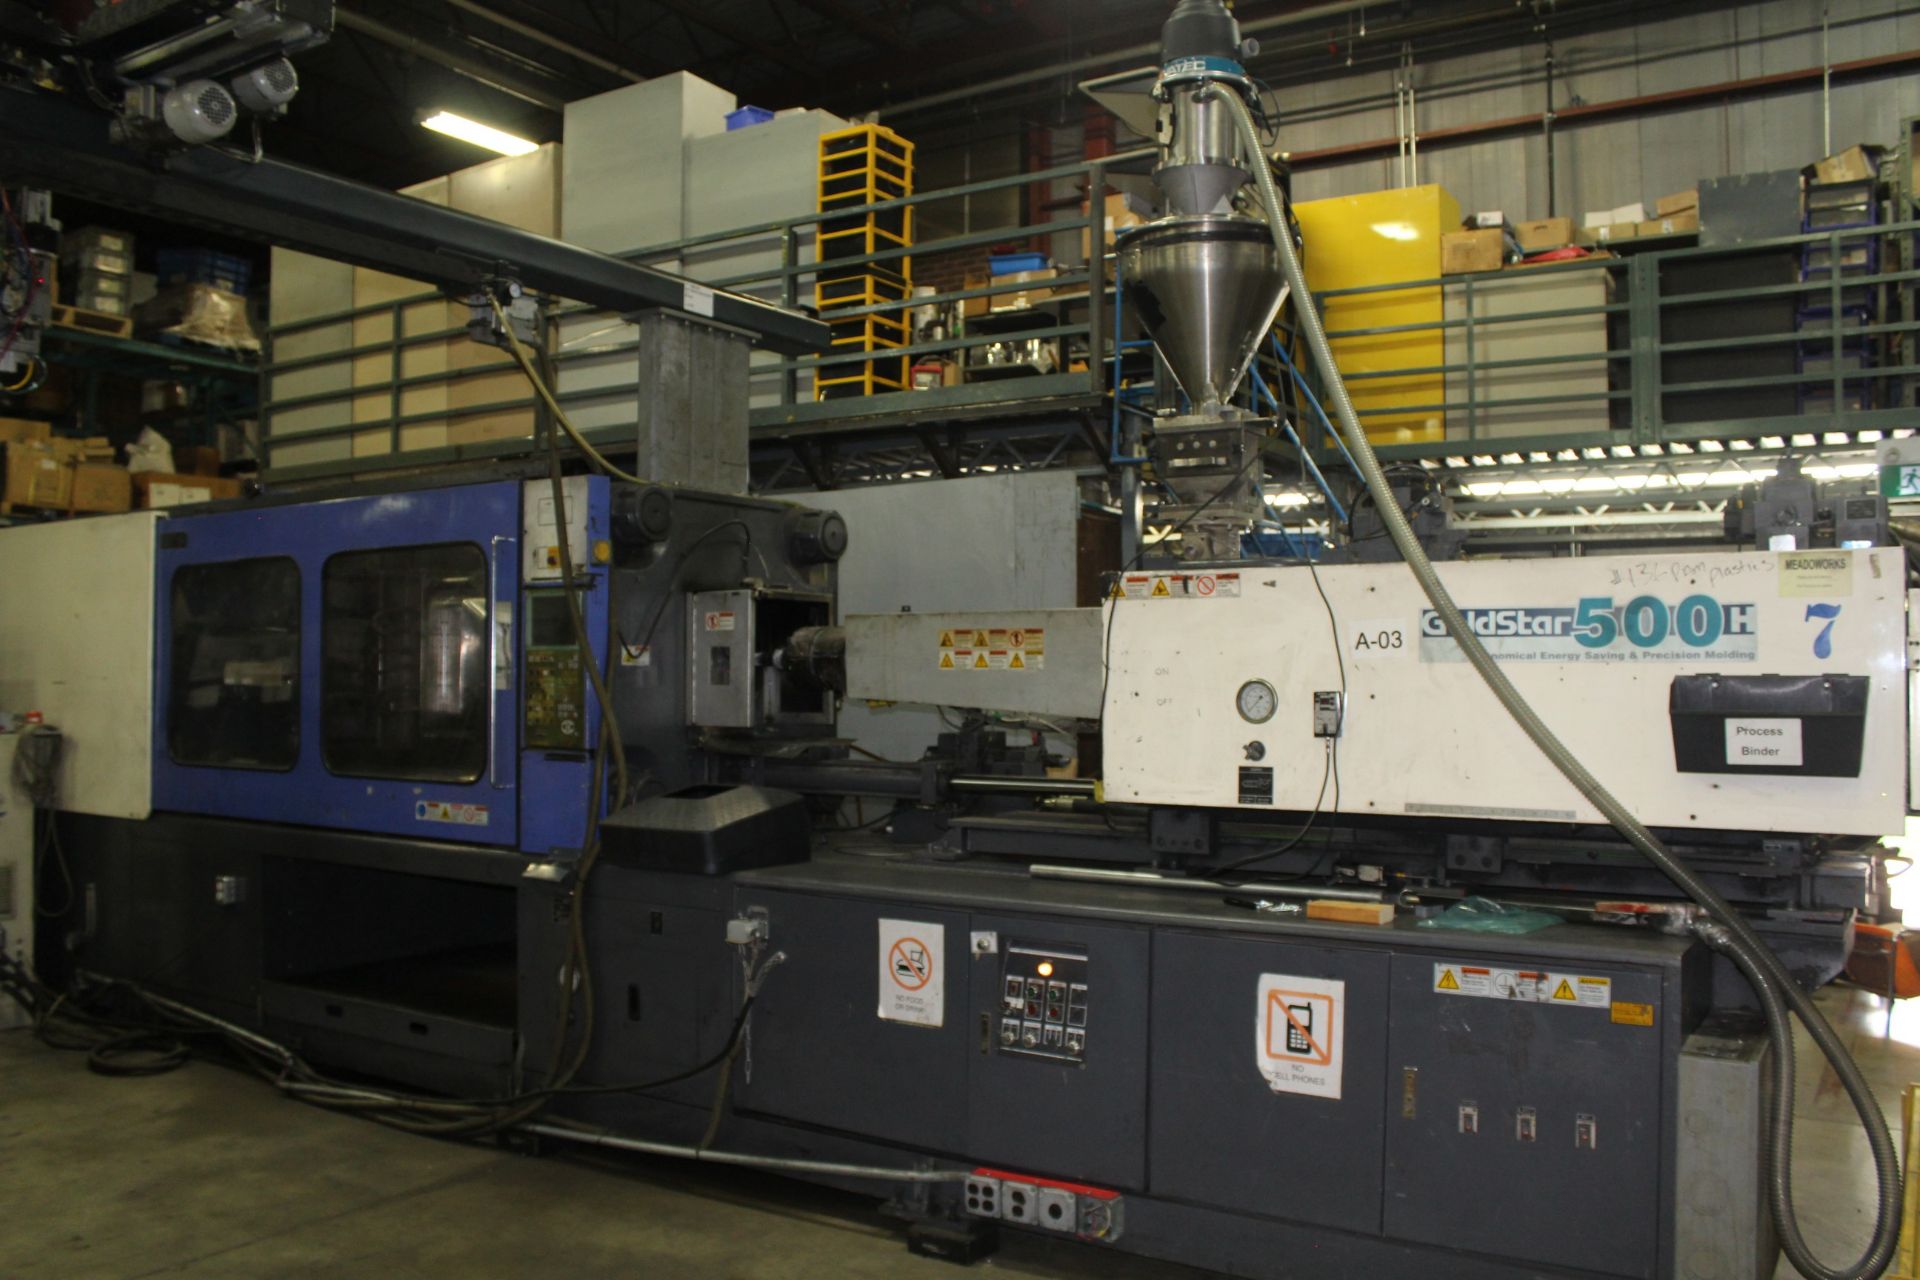 LG GOLD STAR 500H INJECTION MOLDER, 500-TON CAP. - Image 2 of 38